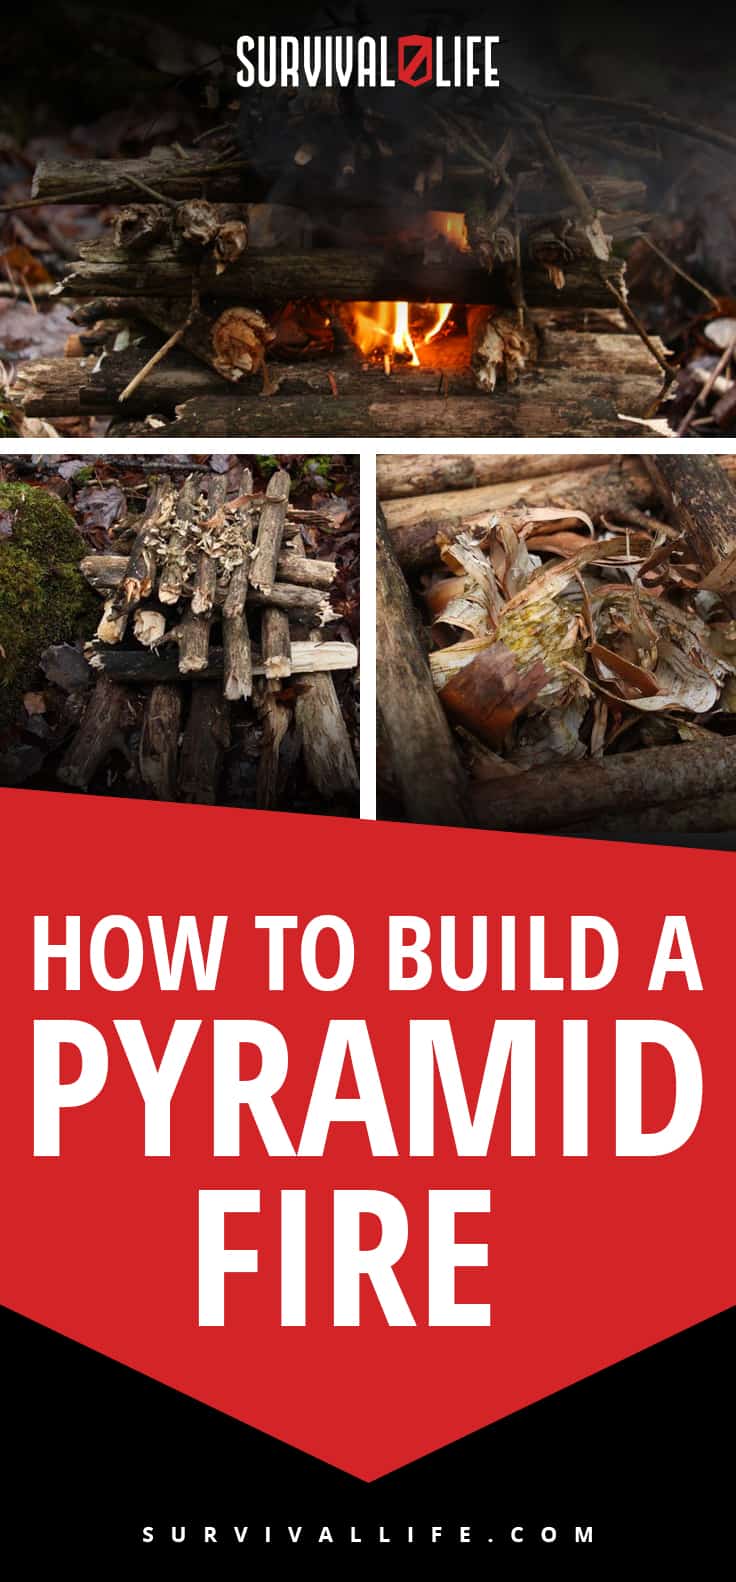 How To Build A Pyramid Fire | Survival Life | https://survivallife.com/build-pyramid-fire/